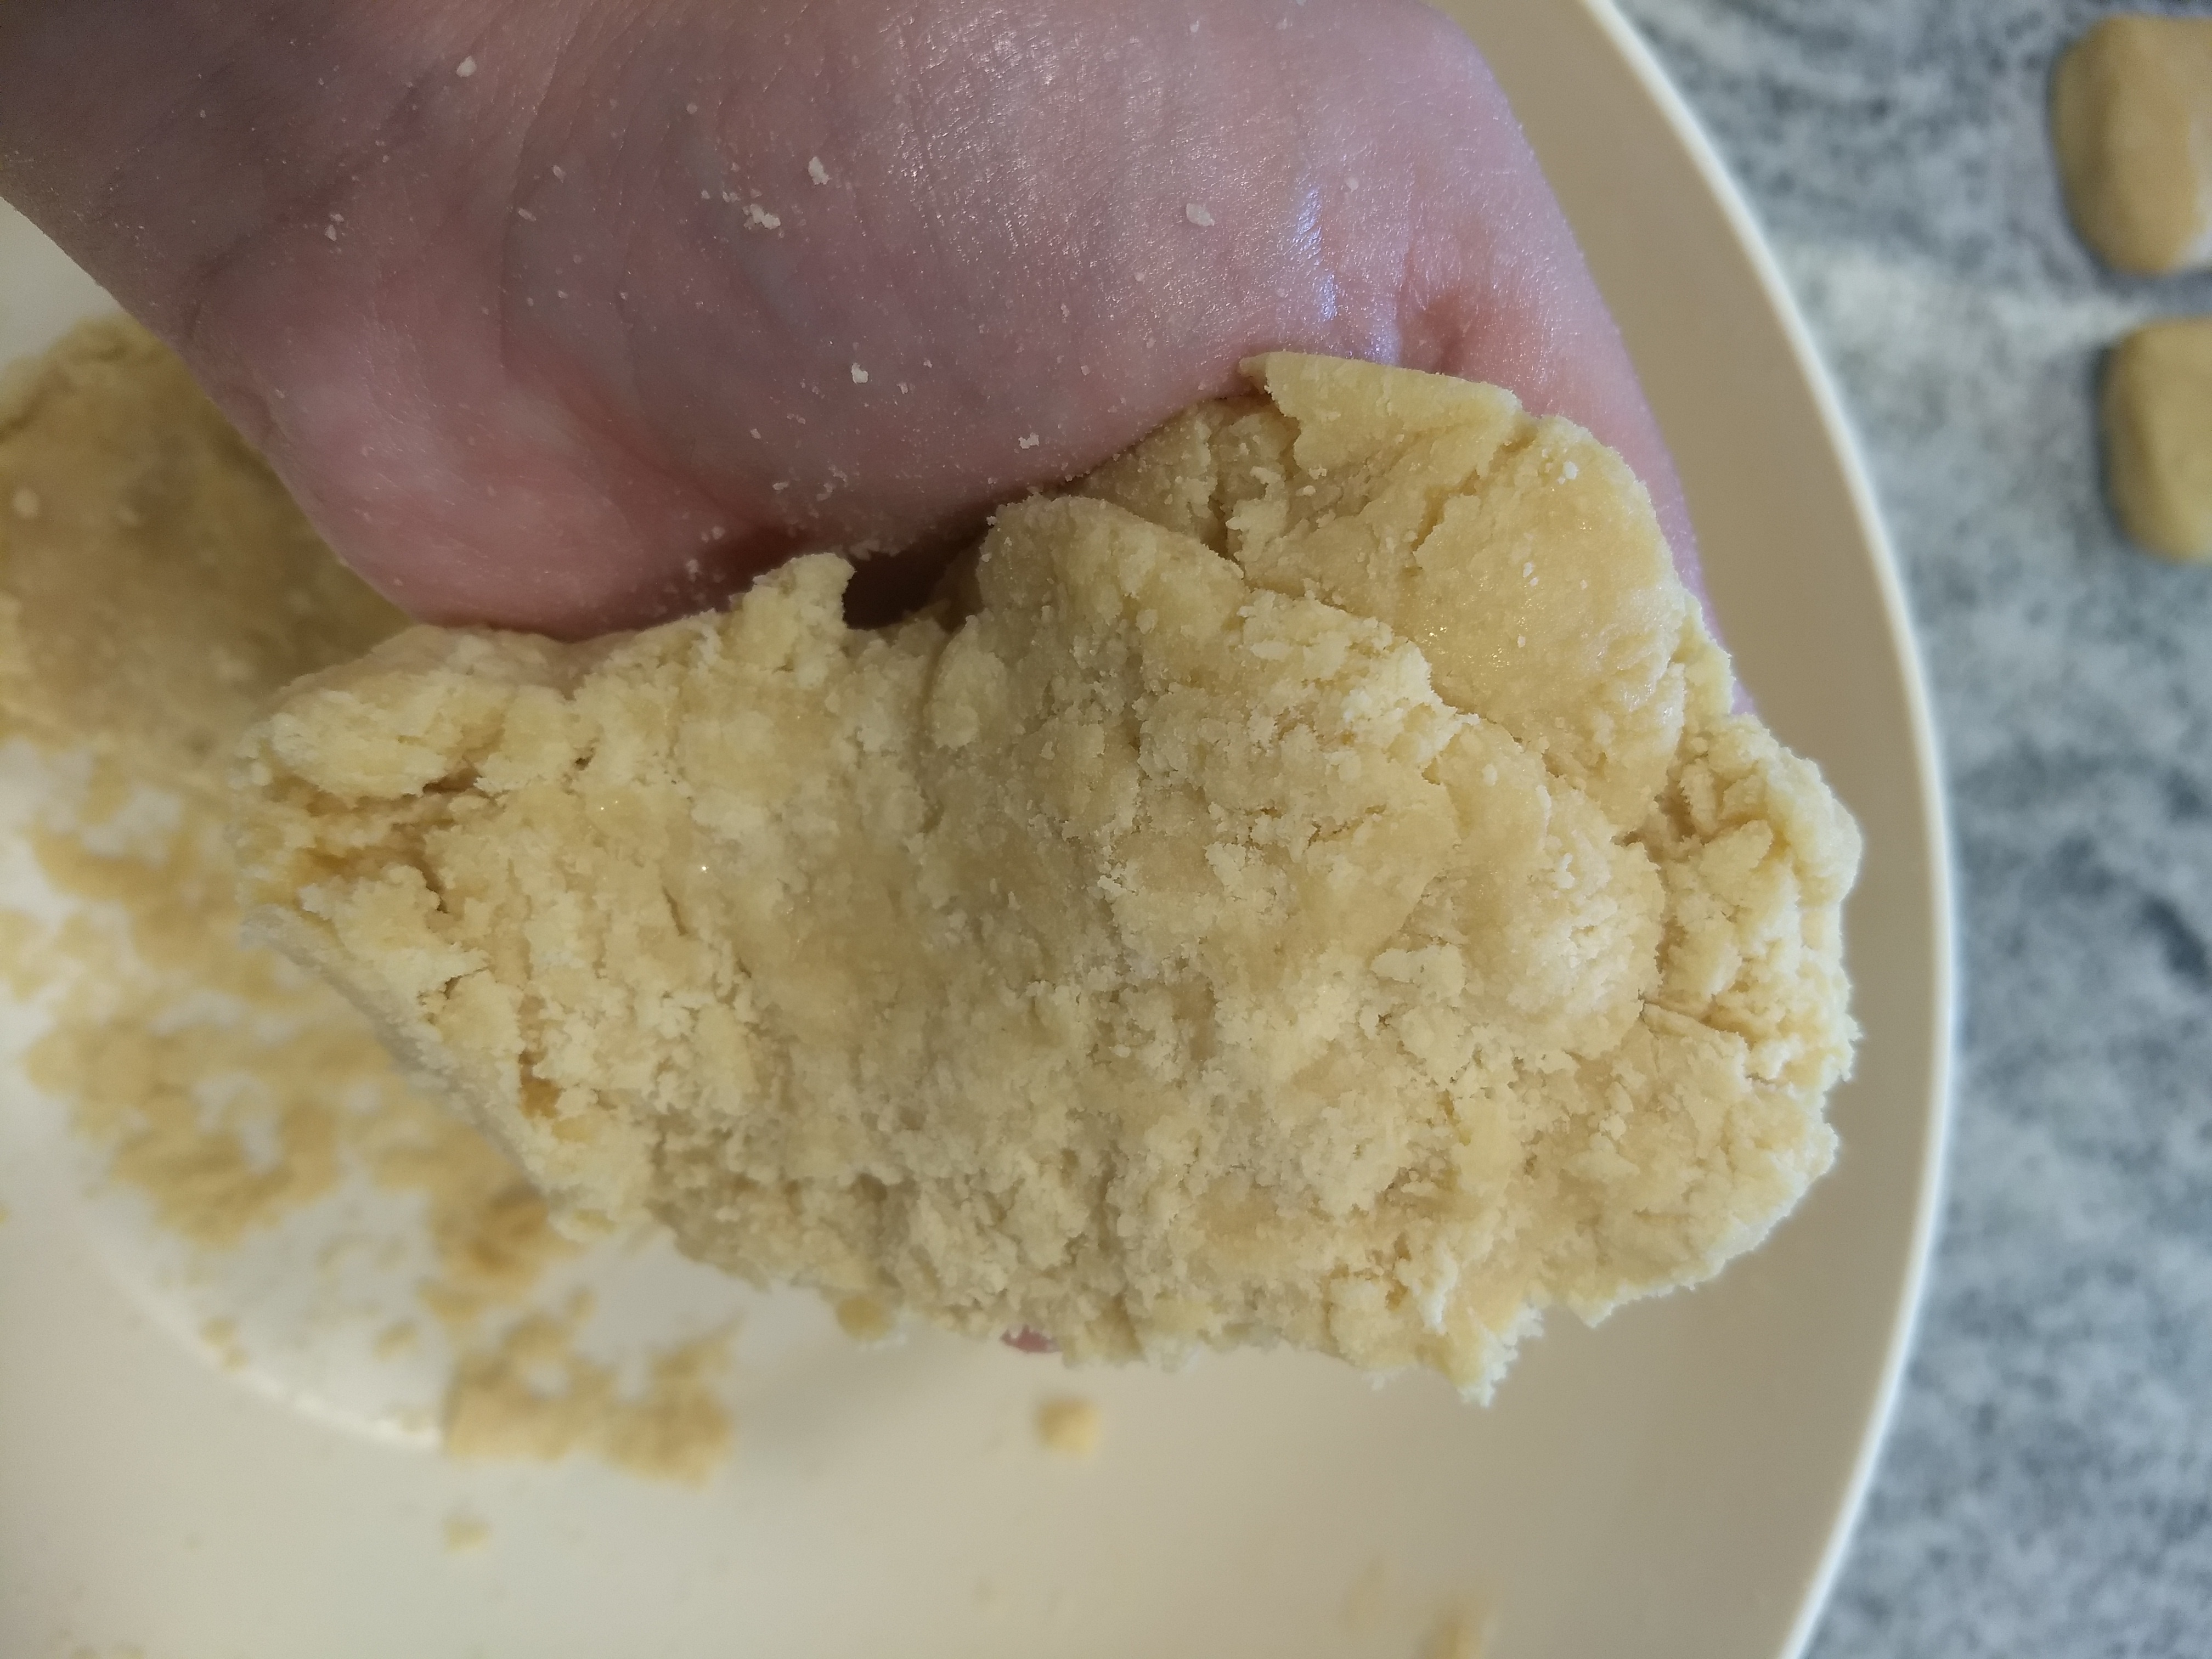 Dough has wet and dry spots